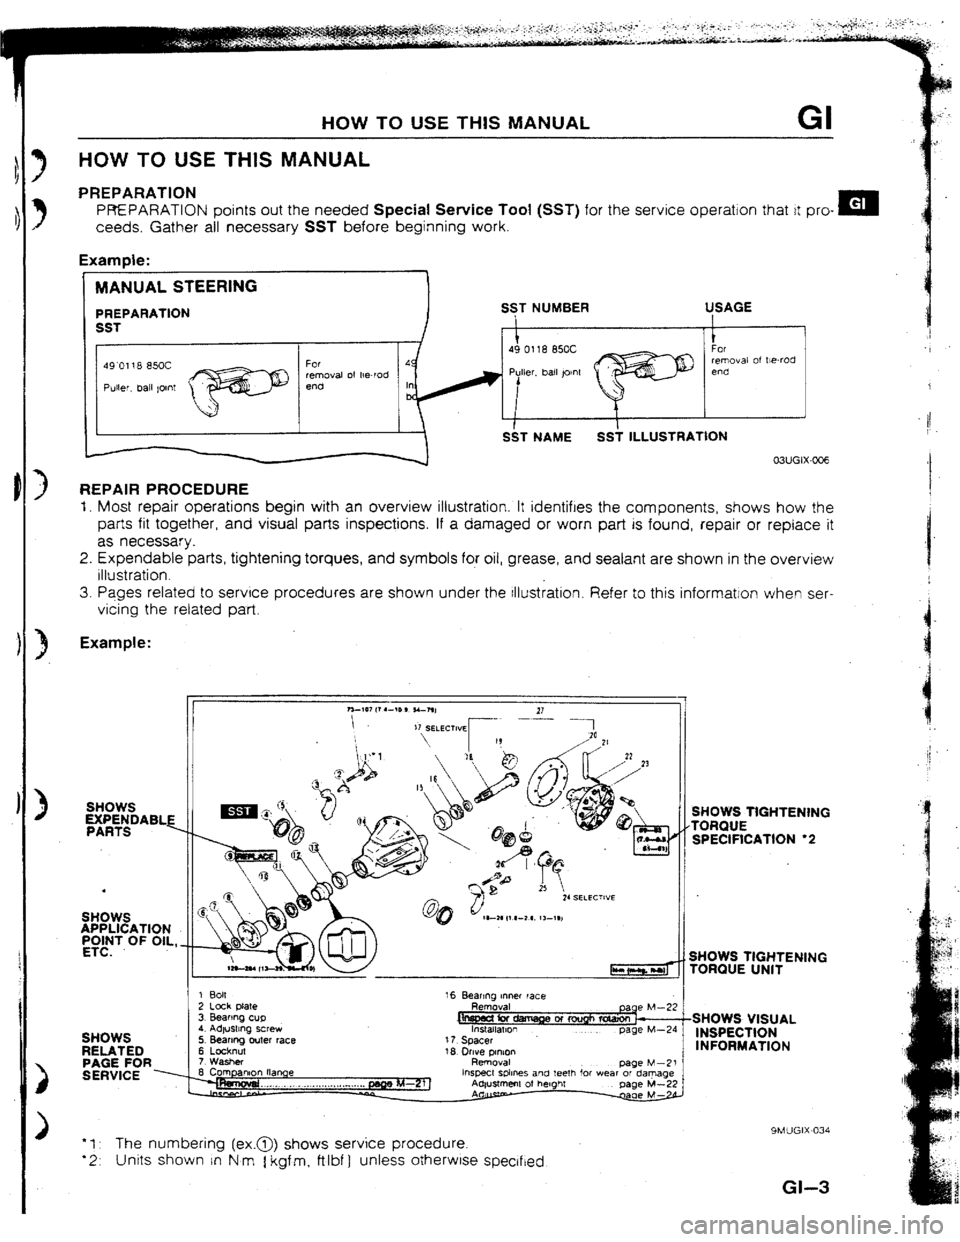 MAZDA 323 1992  Workshop Manual Suplement 3 
3 
, 
> 
1. 
3 
> 
> 
HOW TO USE THIS MANUAL GI 
HOW TO USE THIS MANUAL 
PREPARATION 
PREPARATION points out the needed Special Service Tool (SST) for the service operation that it pro- m 
ceeds. G